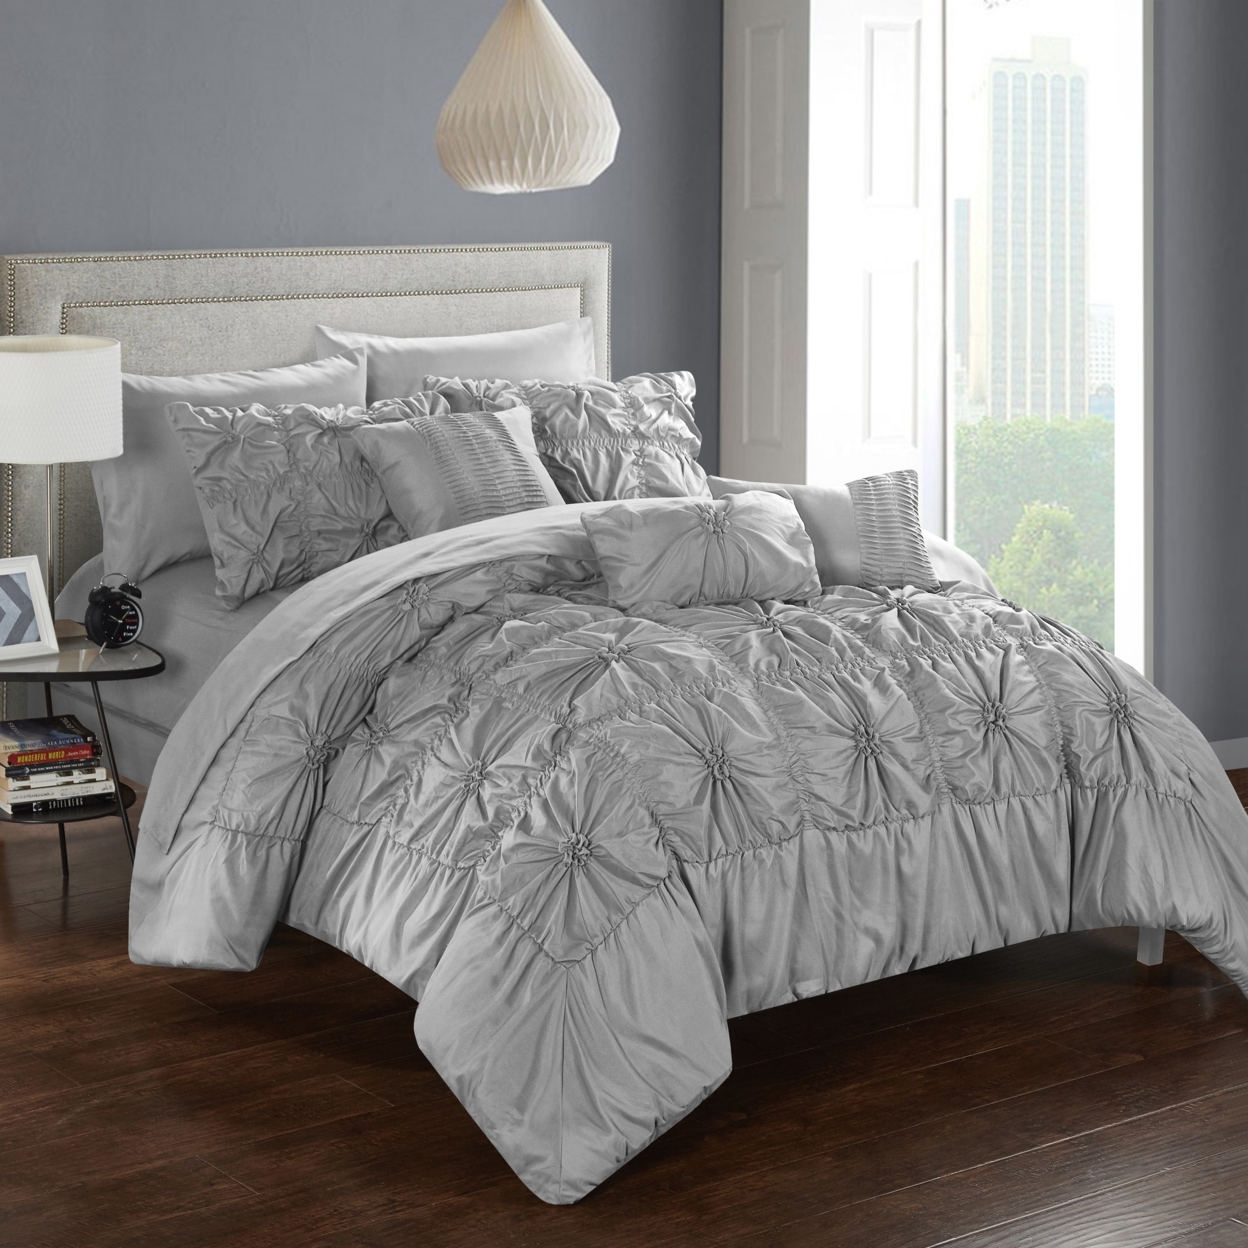 Chic Home 8/10 Piece Sheffield Floral Pinch Pleat Ruffled Designer Embellished Bed In A Bag Comforter Set With Sheet Set - Grey, Queen